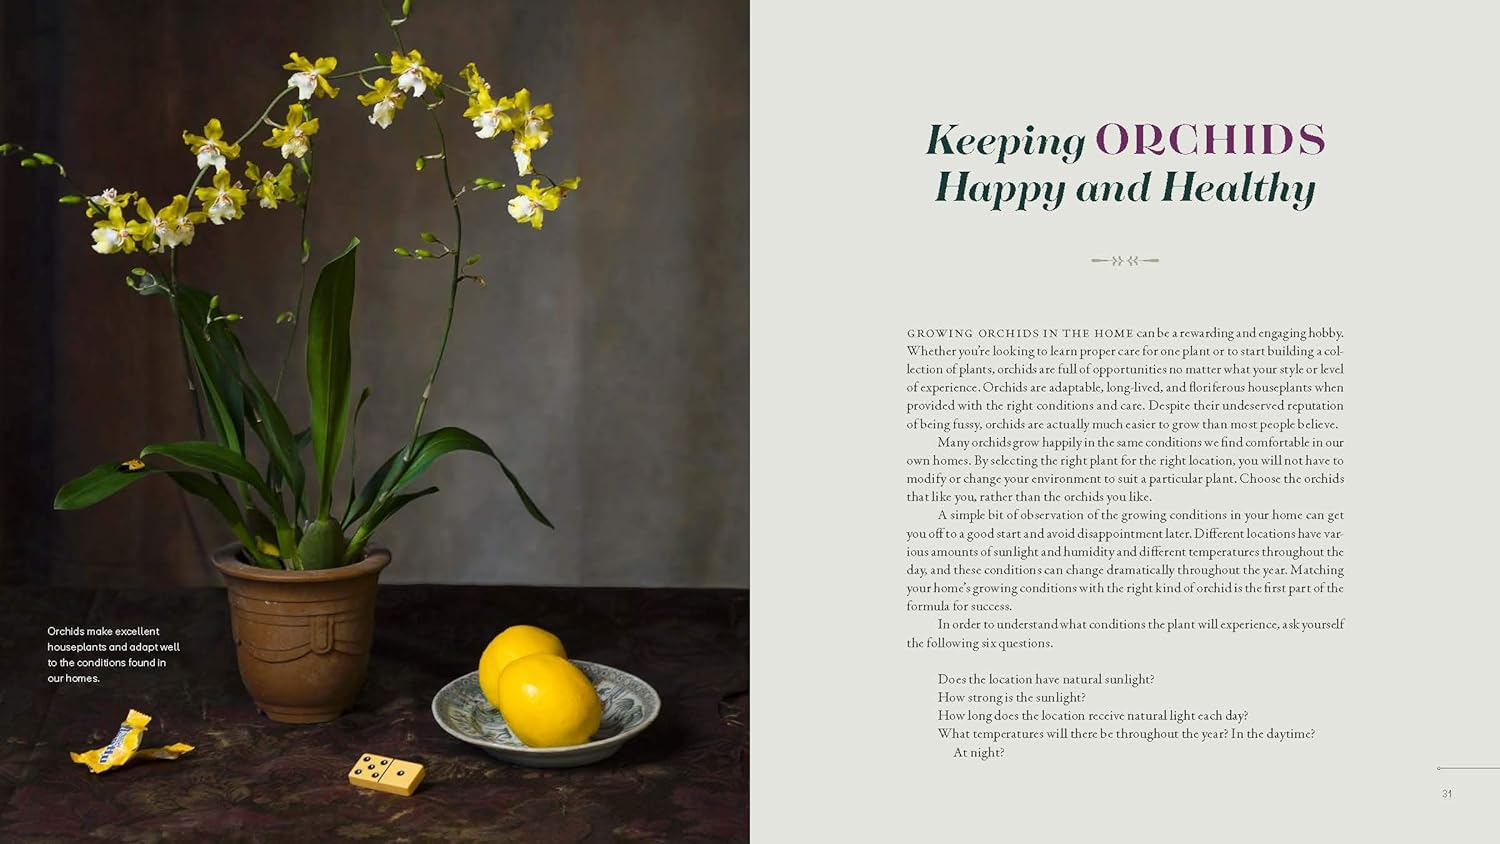 Orchid Modern: Living and Designing with the World’s Most Elegant Houseplants